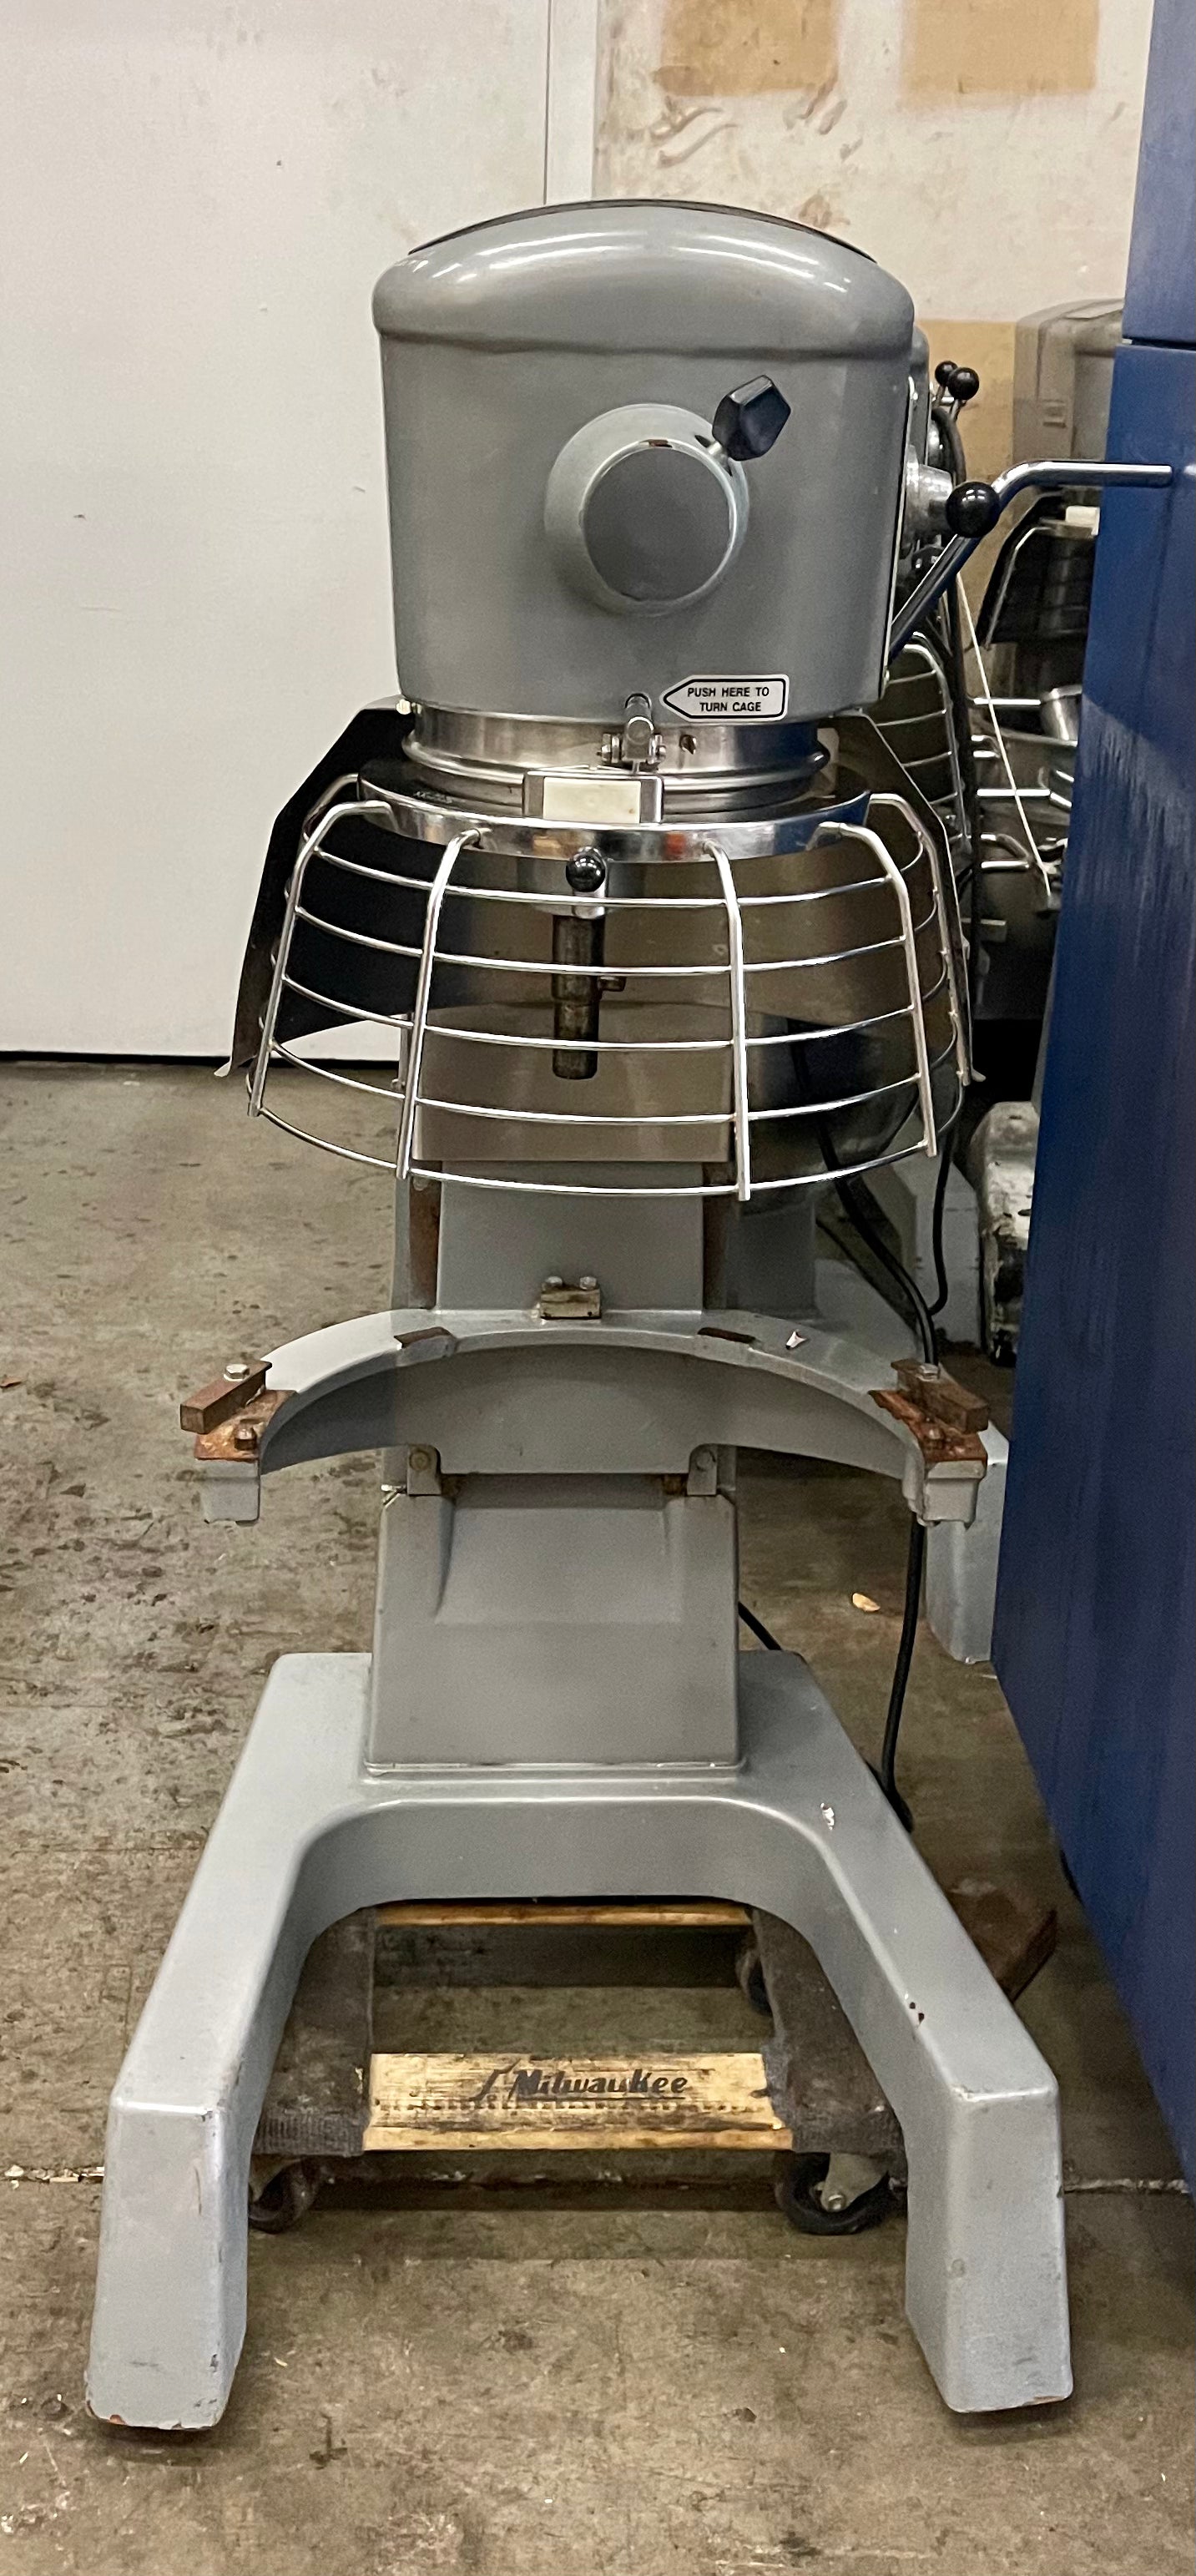 Hobart D300t 30 quart mixer 115V comes with a stainless steel bowl and —  Palm Beach Restaurant Equipment